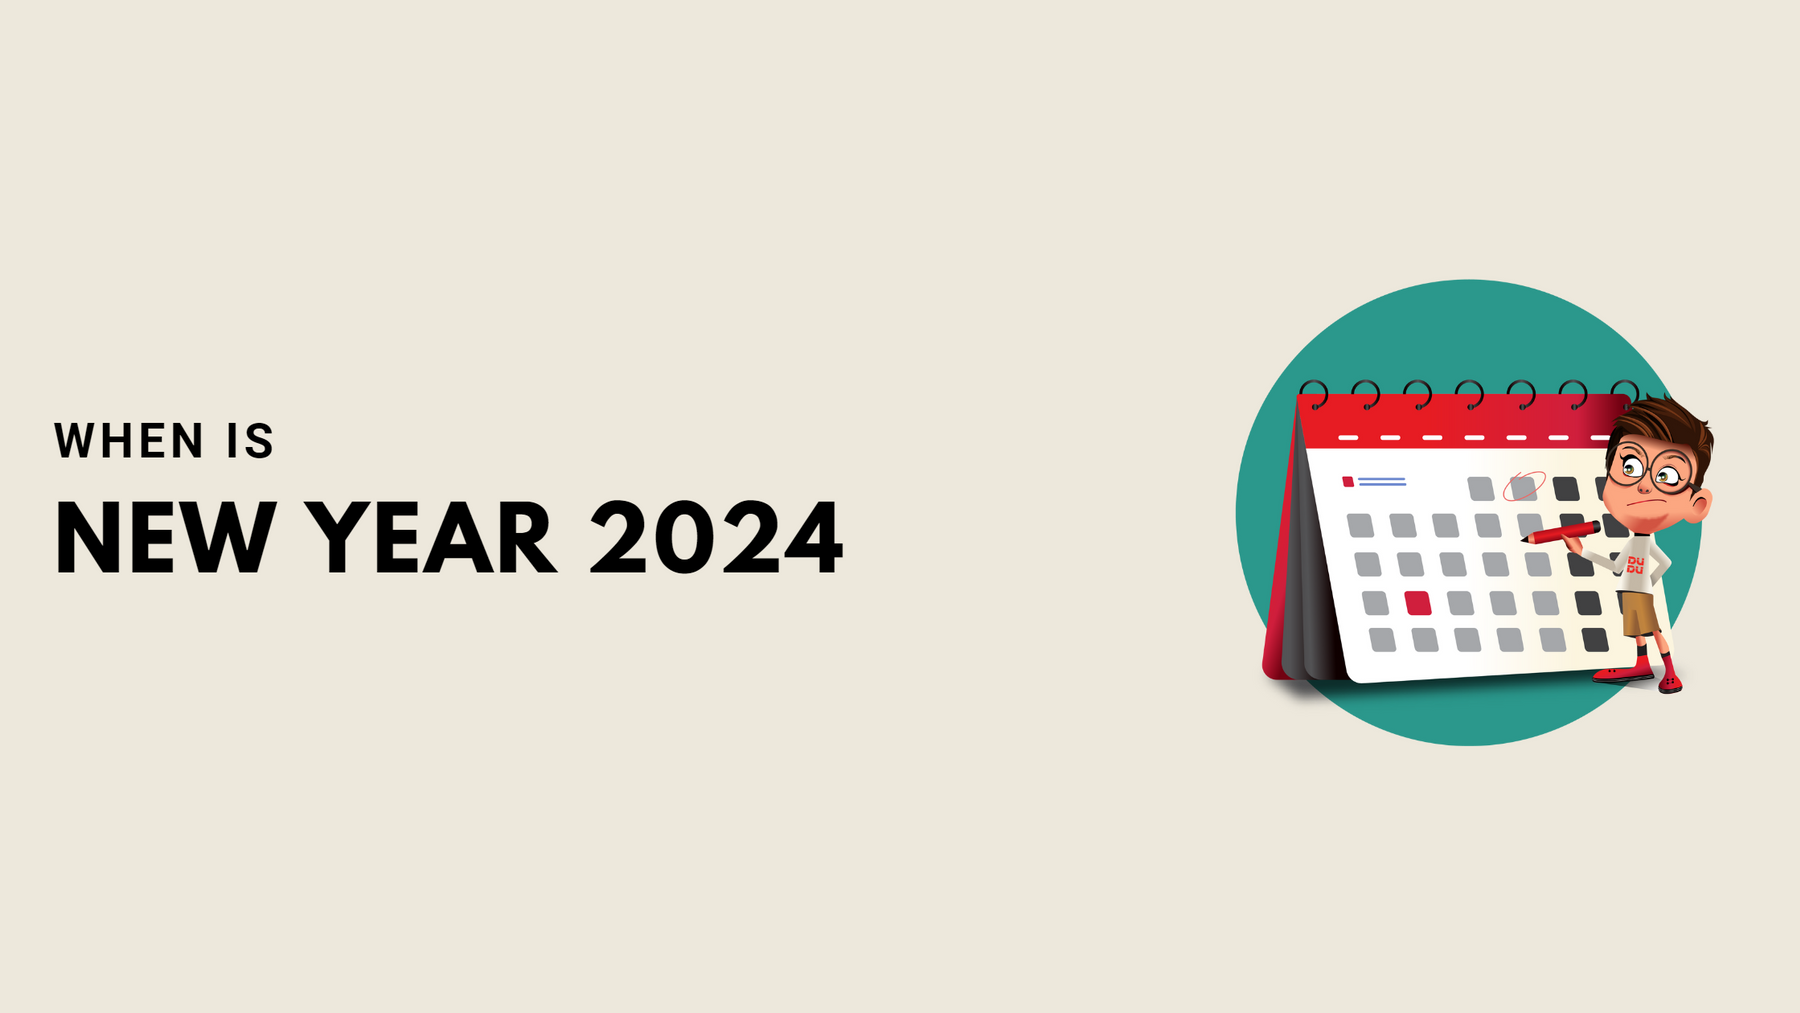 When Is New Year 2024?